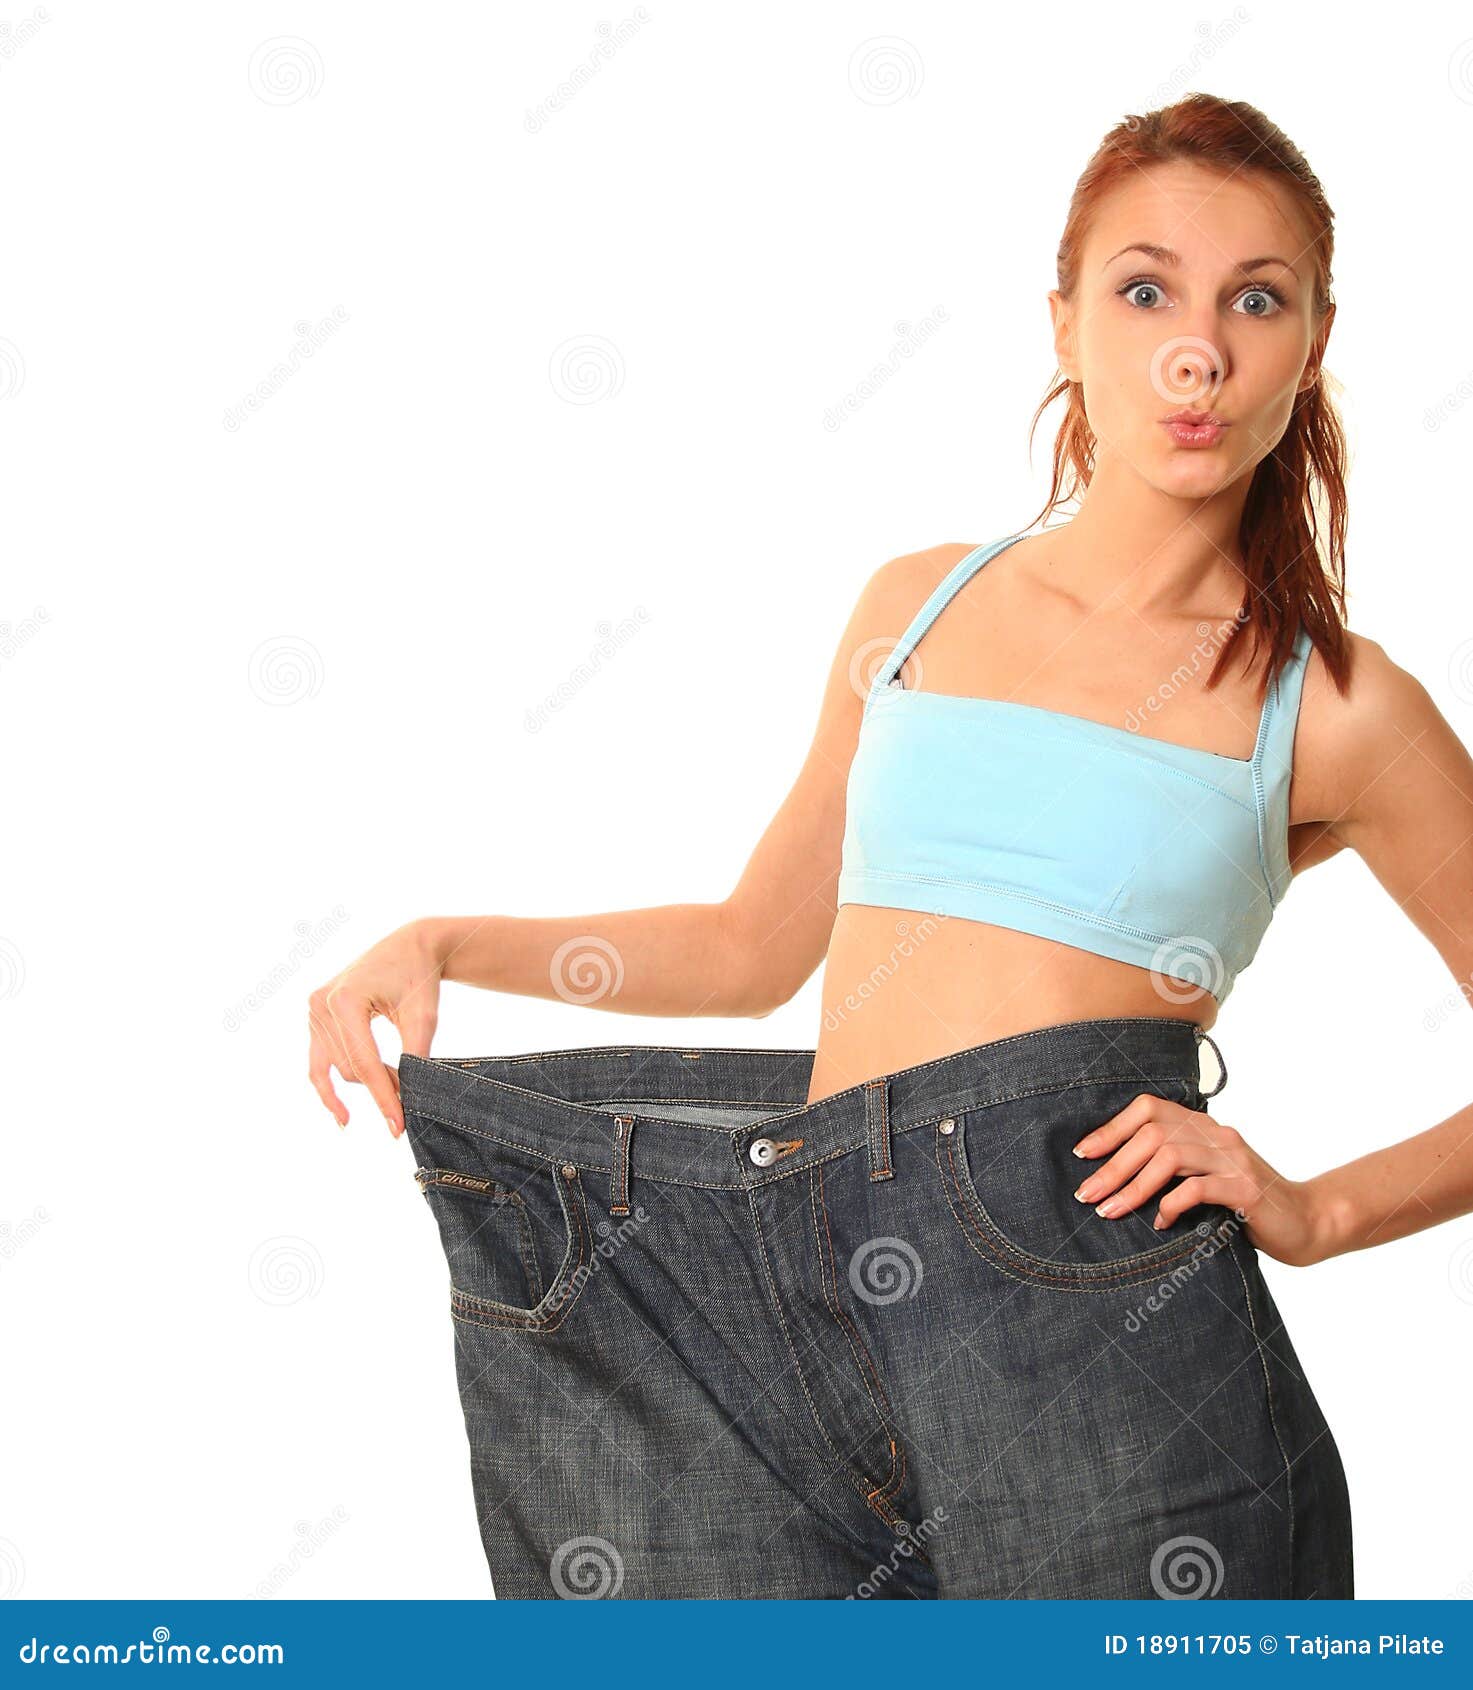 Big jeans stock image. Image of beautiful, hair, person - 18911705